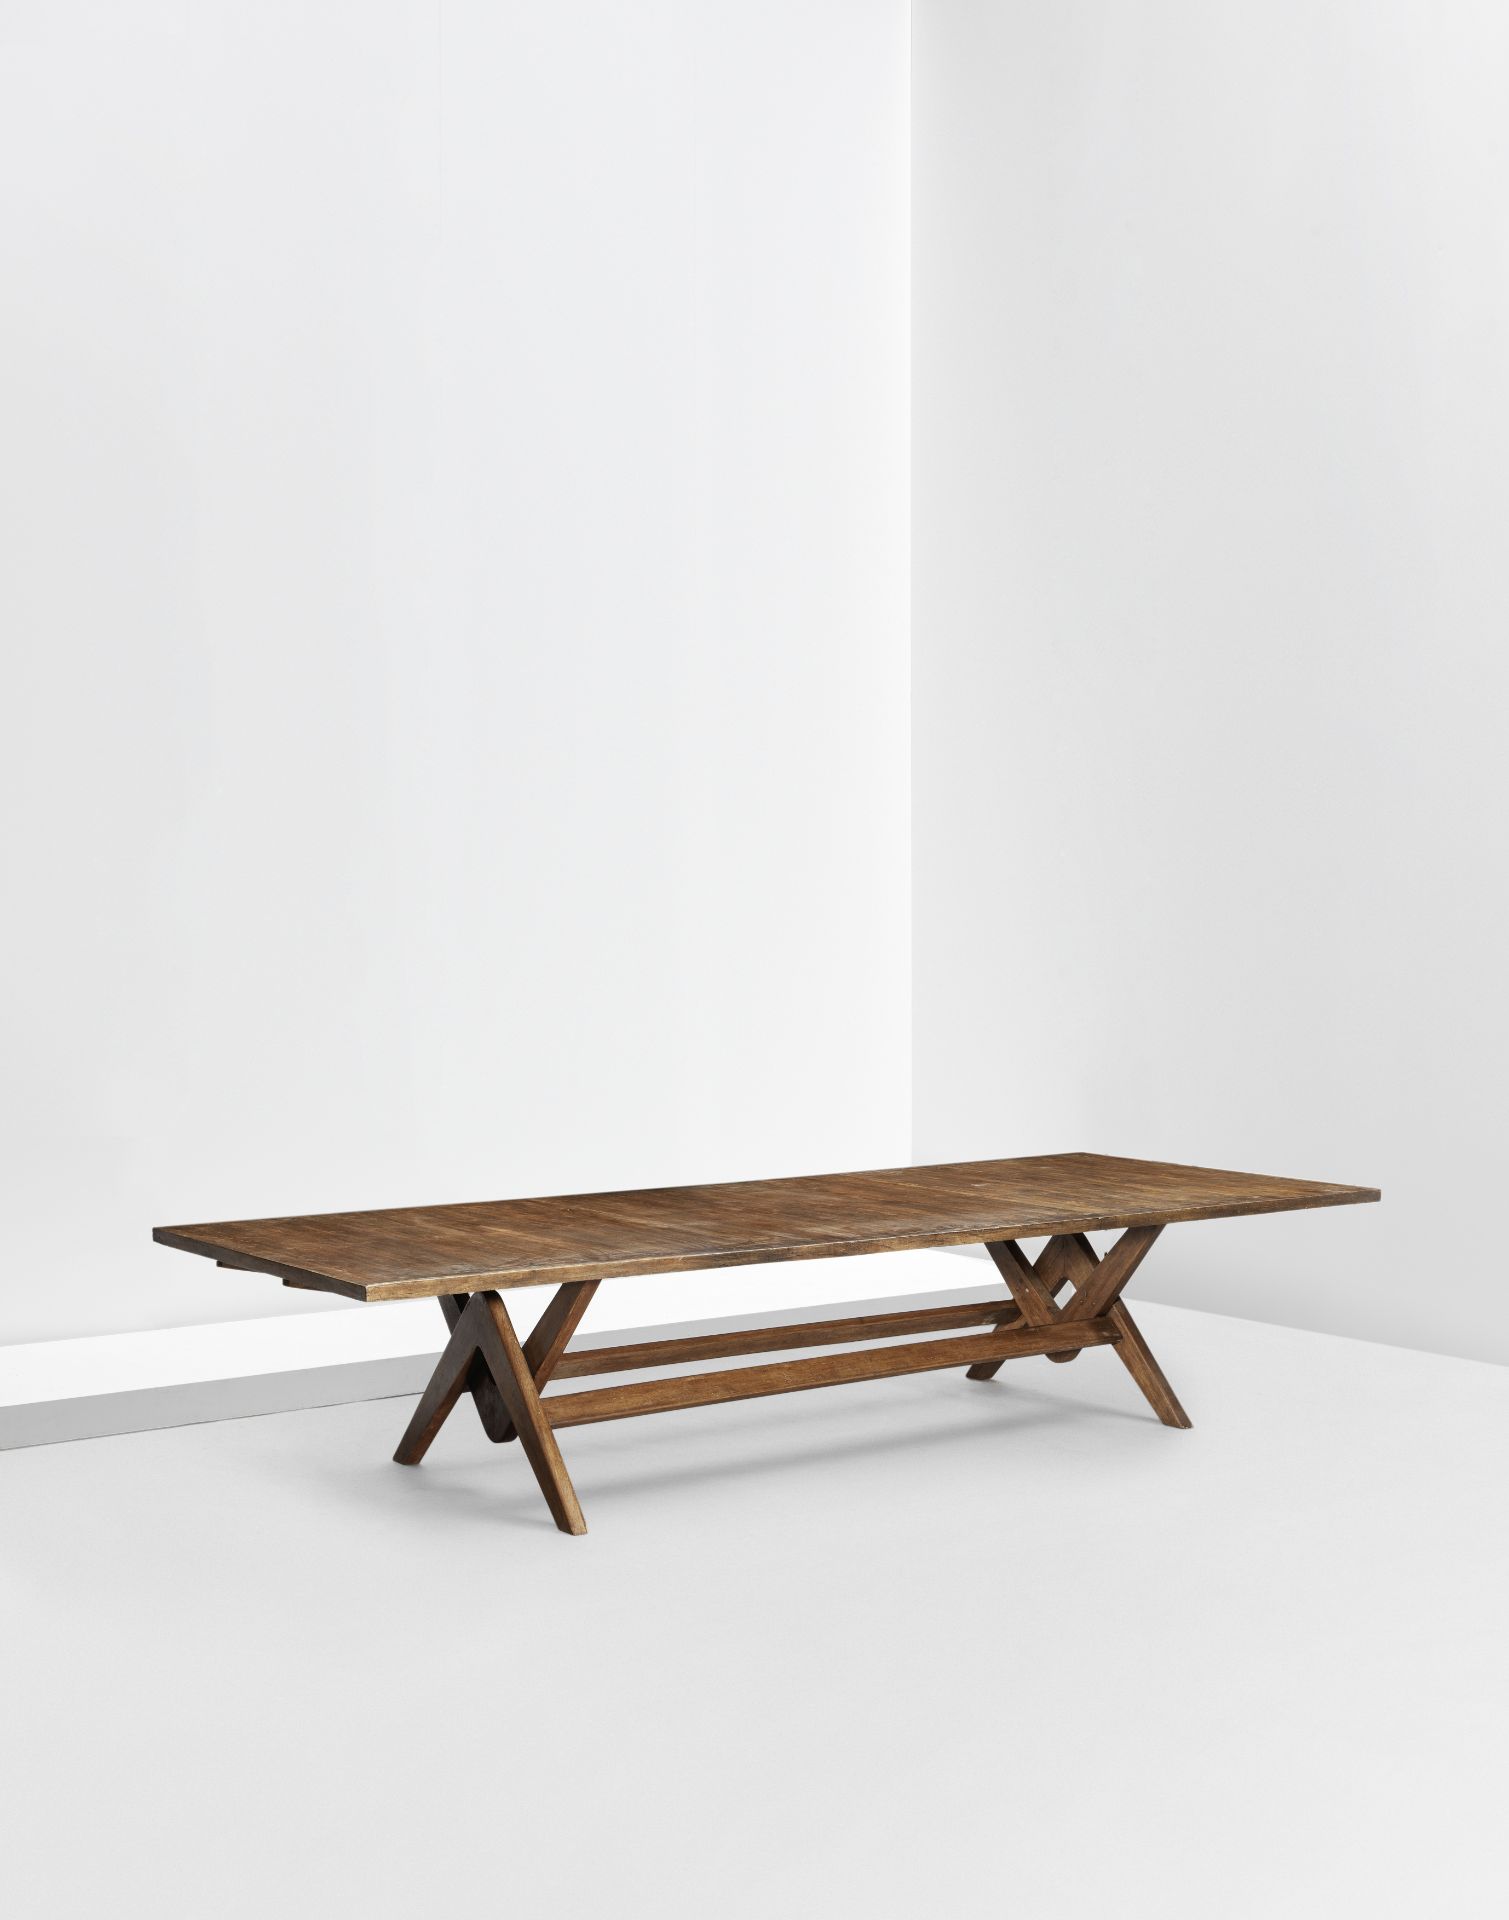 Le Corbusier and Pierre Jeanneret 'Committee' table, model no. LC/PJ-TAT-14-B, designed for the A...